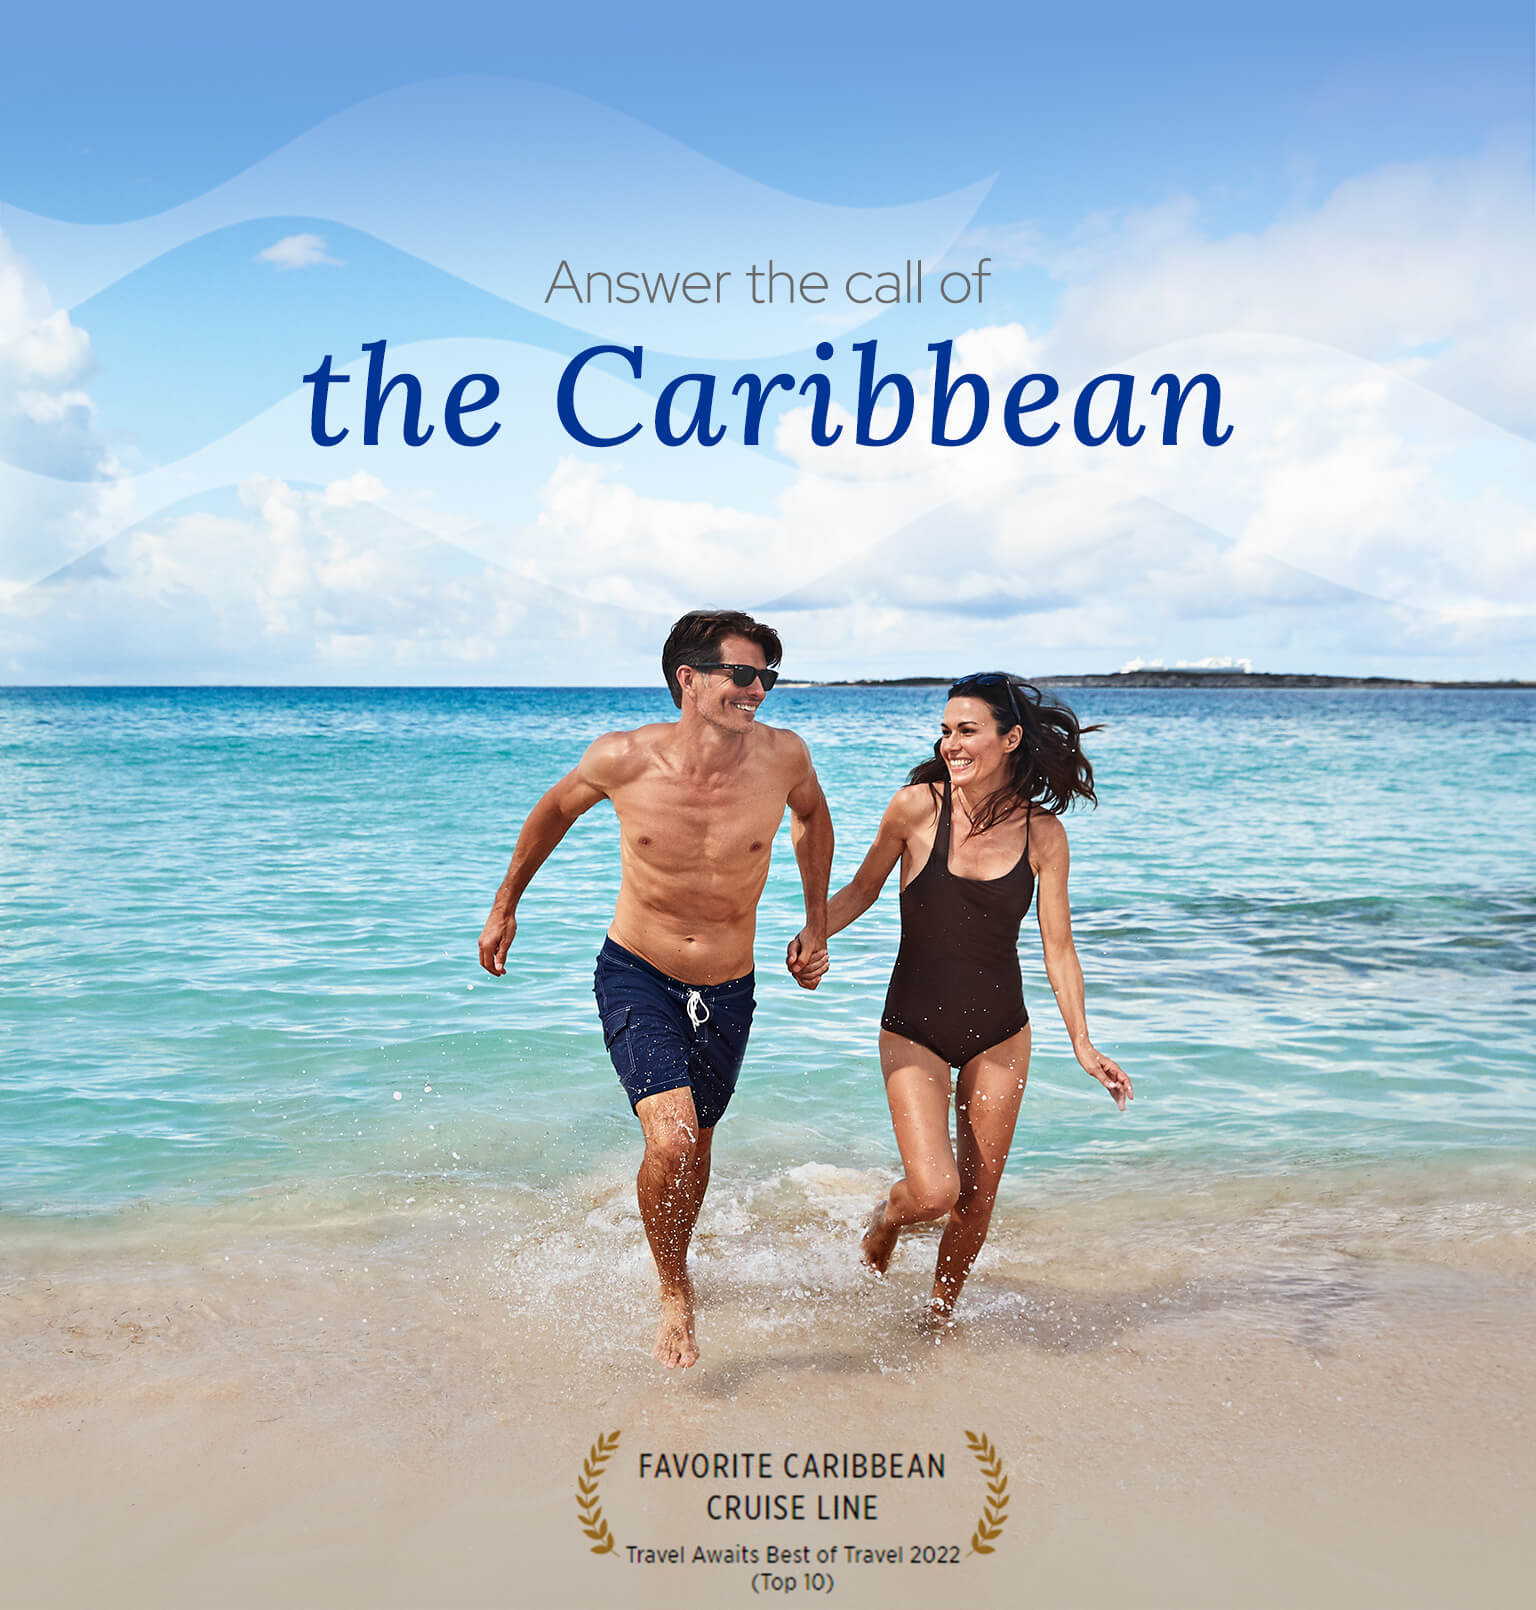 Couple at beach in Caribbean. Answer the call of the Caribbean. Favorite Caribbean Cruise Line. Travel Awaits Best of Travel 2022 (Top 10) logo.